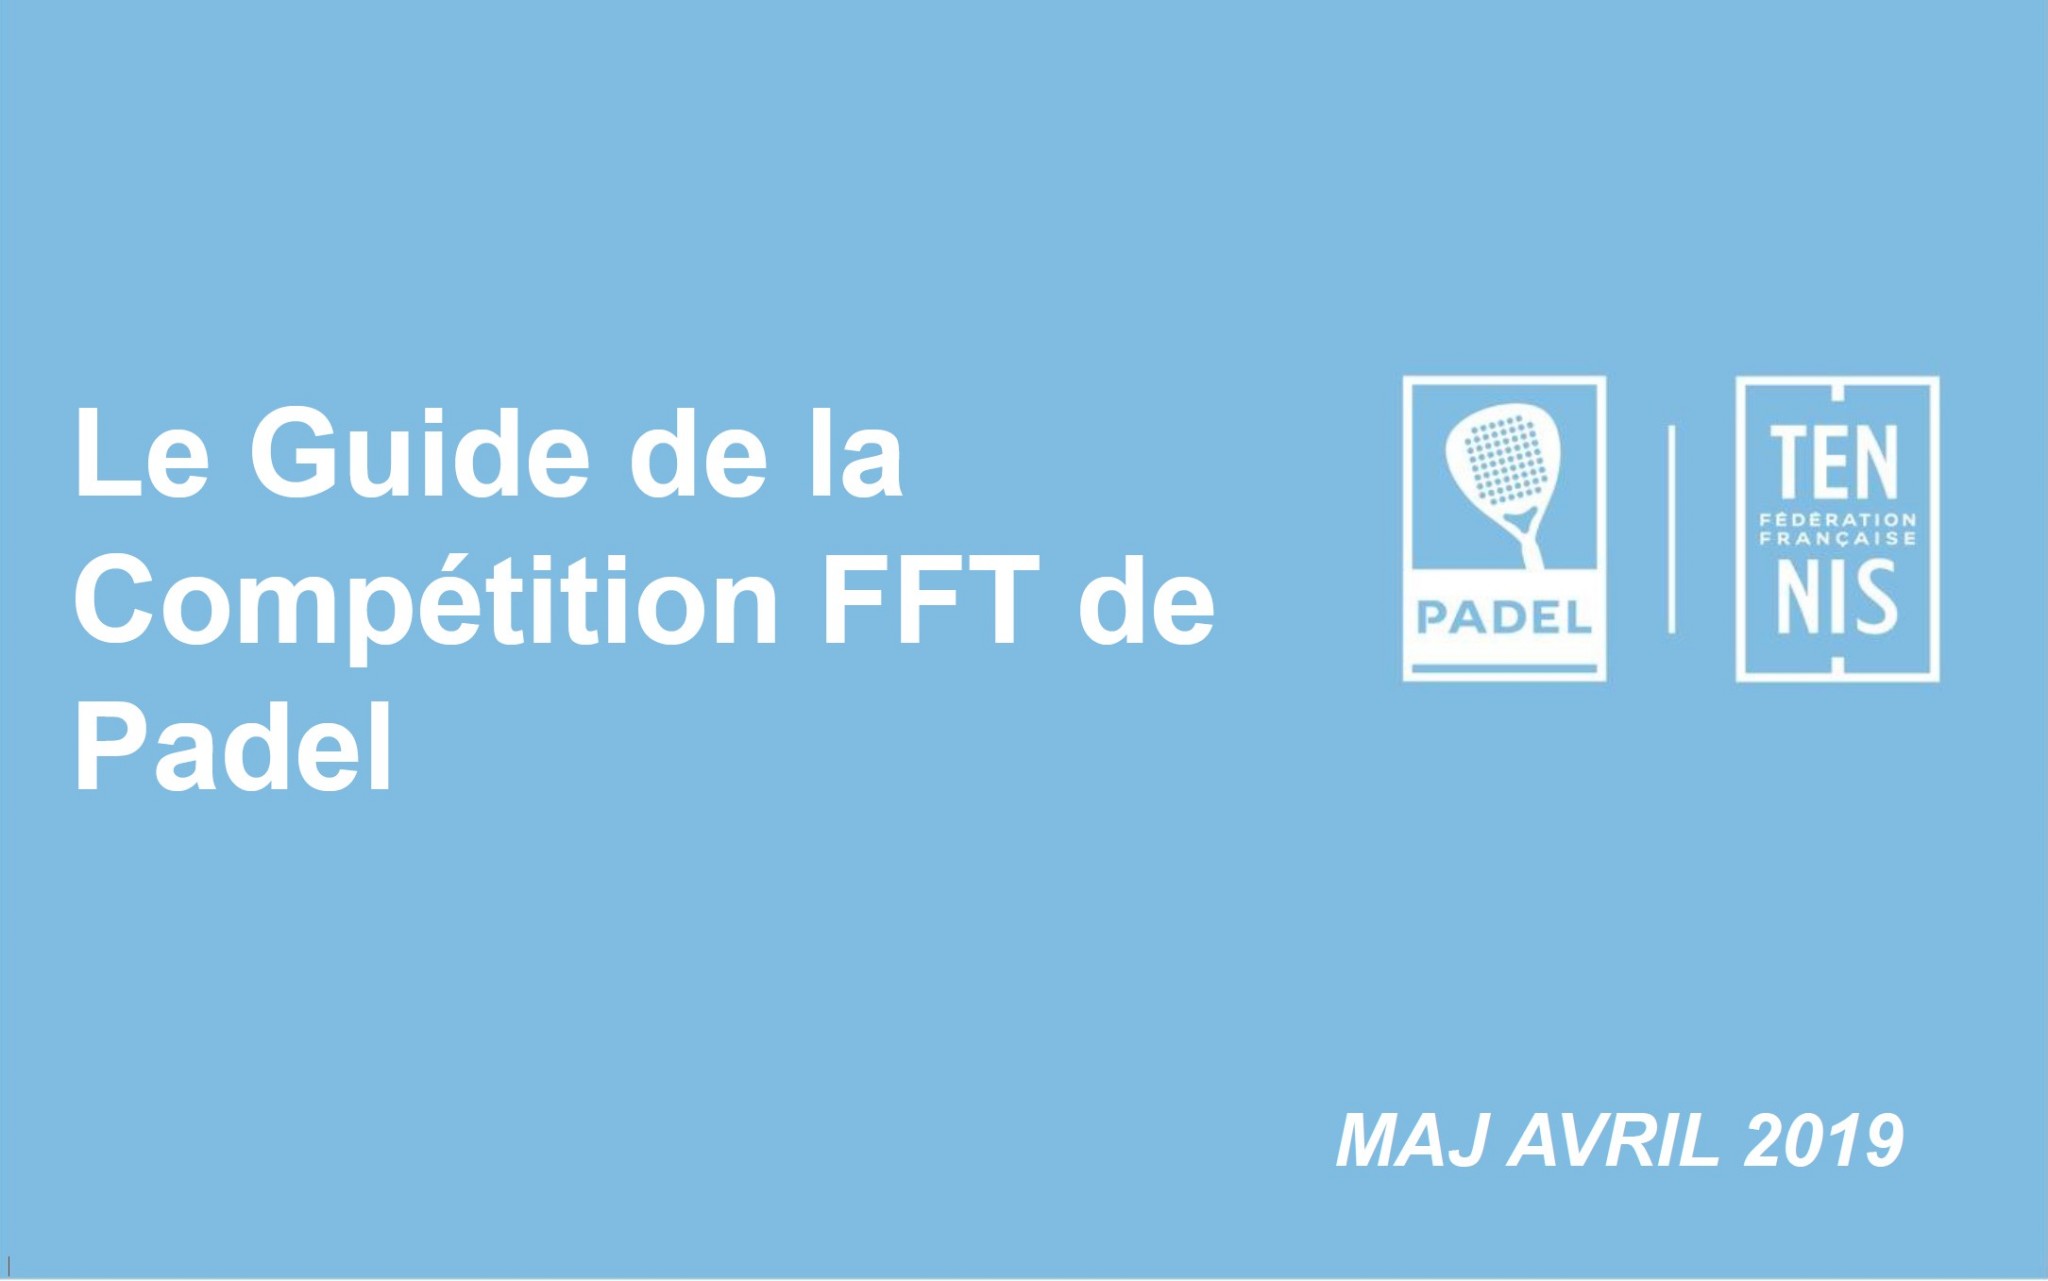 Competition guide Padel - April 2019